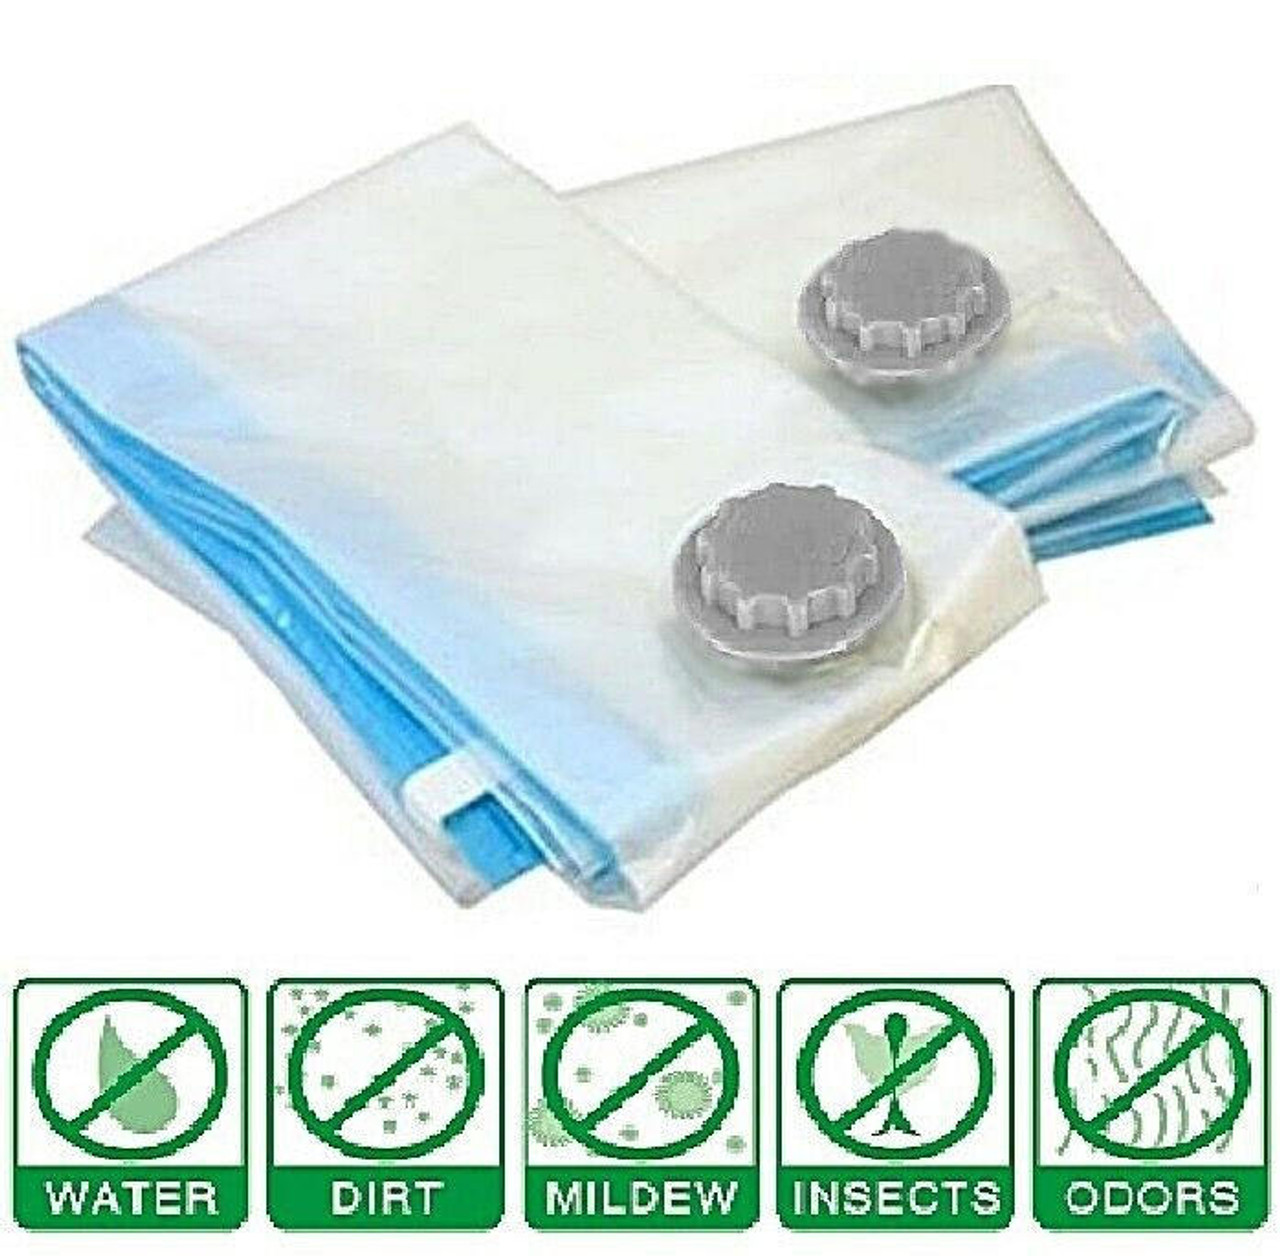 https://cdn11.bigcommerce.com/s-zrh8tkpr8d/images/stencil/1280x1280/products/9979/31173/10-pack-6-super-jumbo-xl-largest-vacuum-space-saver-storage-bag-4-travel-bags__69791.1689534177.jpg?c=2&imbypass=on